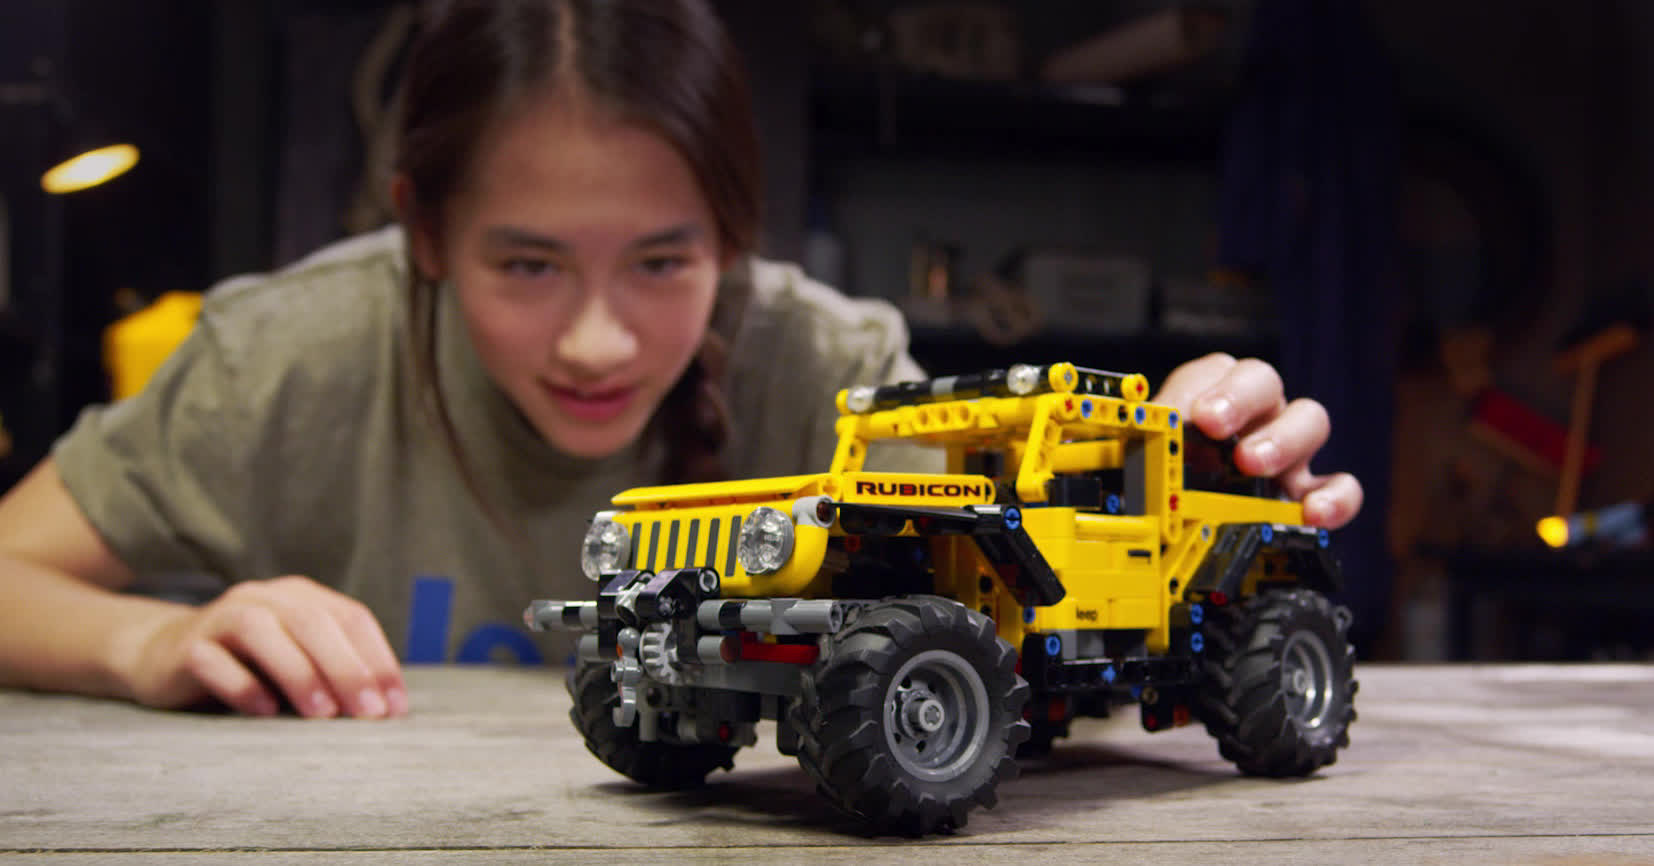 Lego's latest addition to the Technic series is a Jeep Wrangler with articulating suspension and a working winch